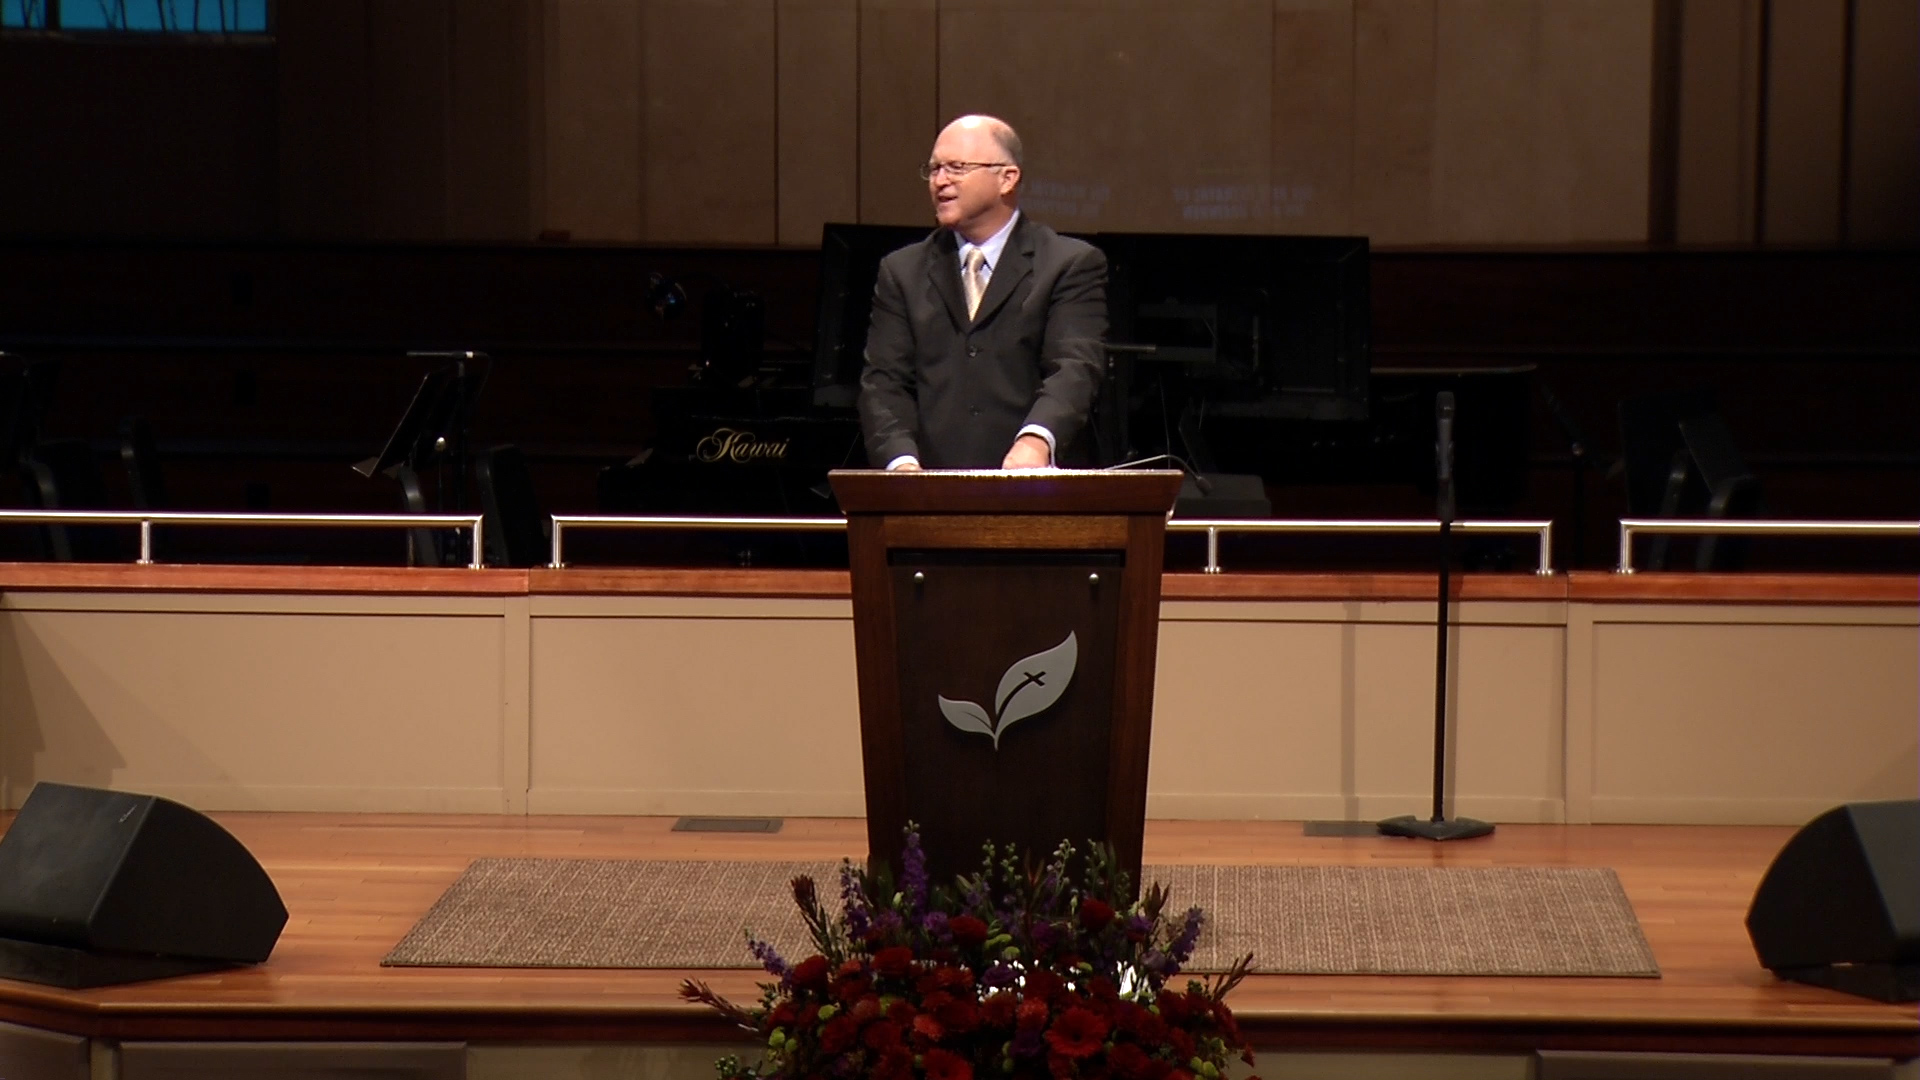 Pastor Paul Chappell: Forgiveness Changes Everything